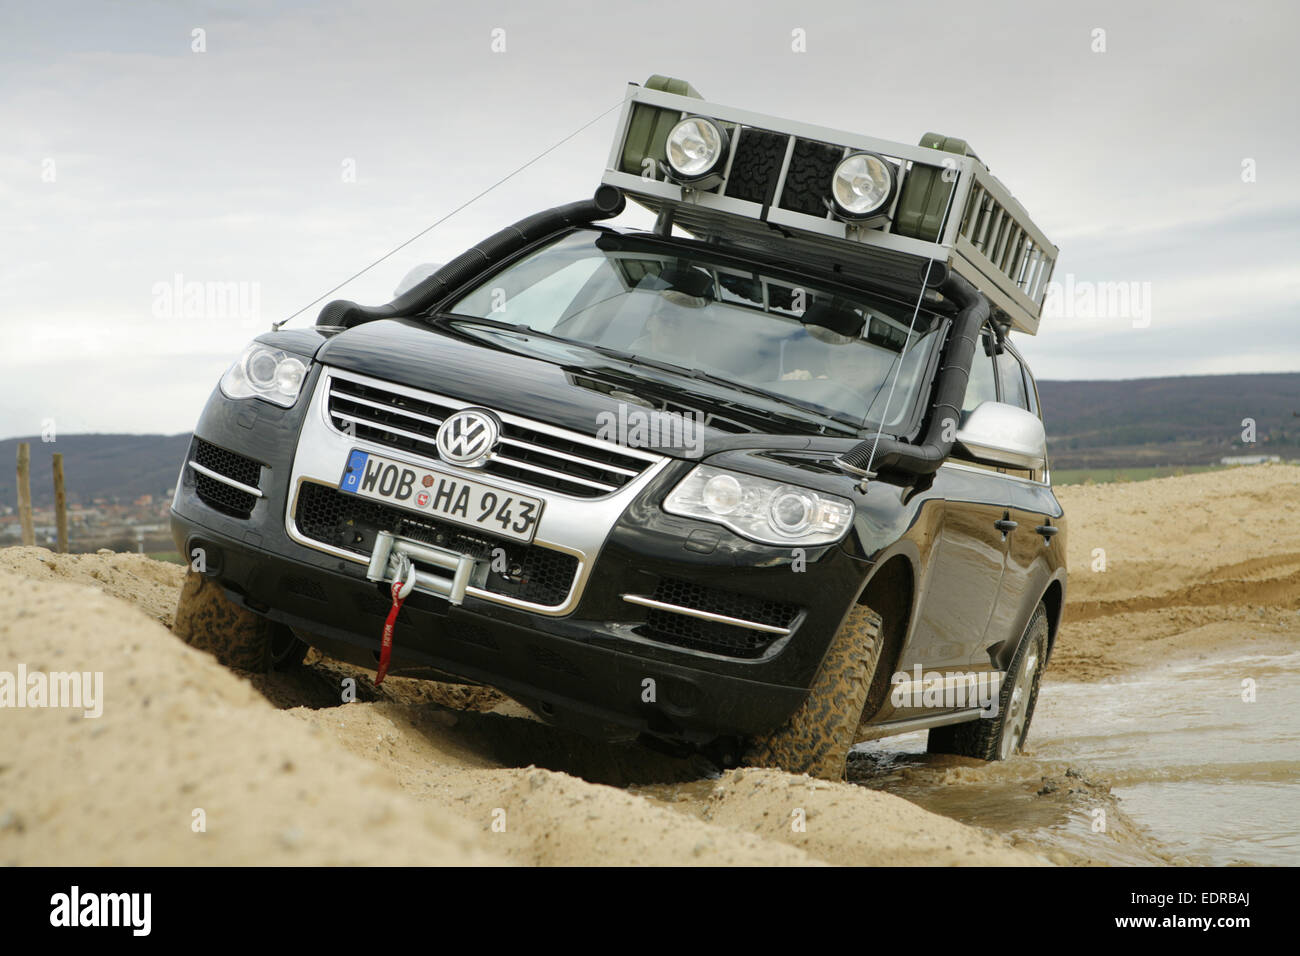 Offroad Vw Touareg High Resolution Stock Photography and Images - Alamy